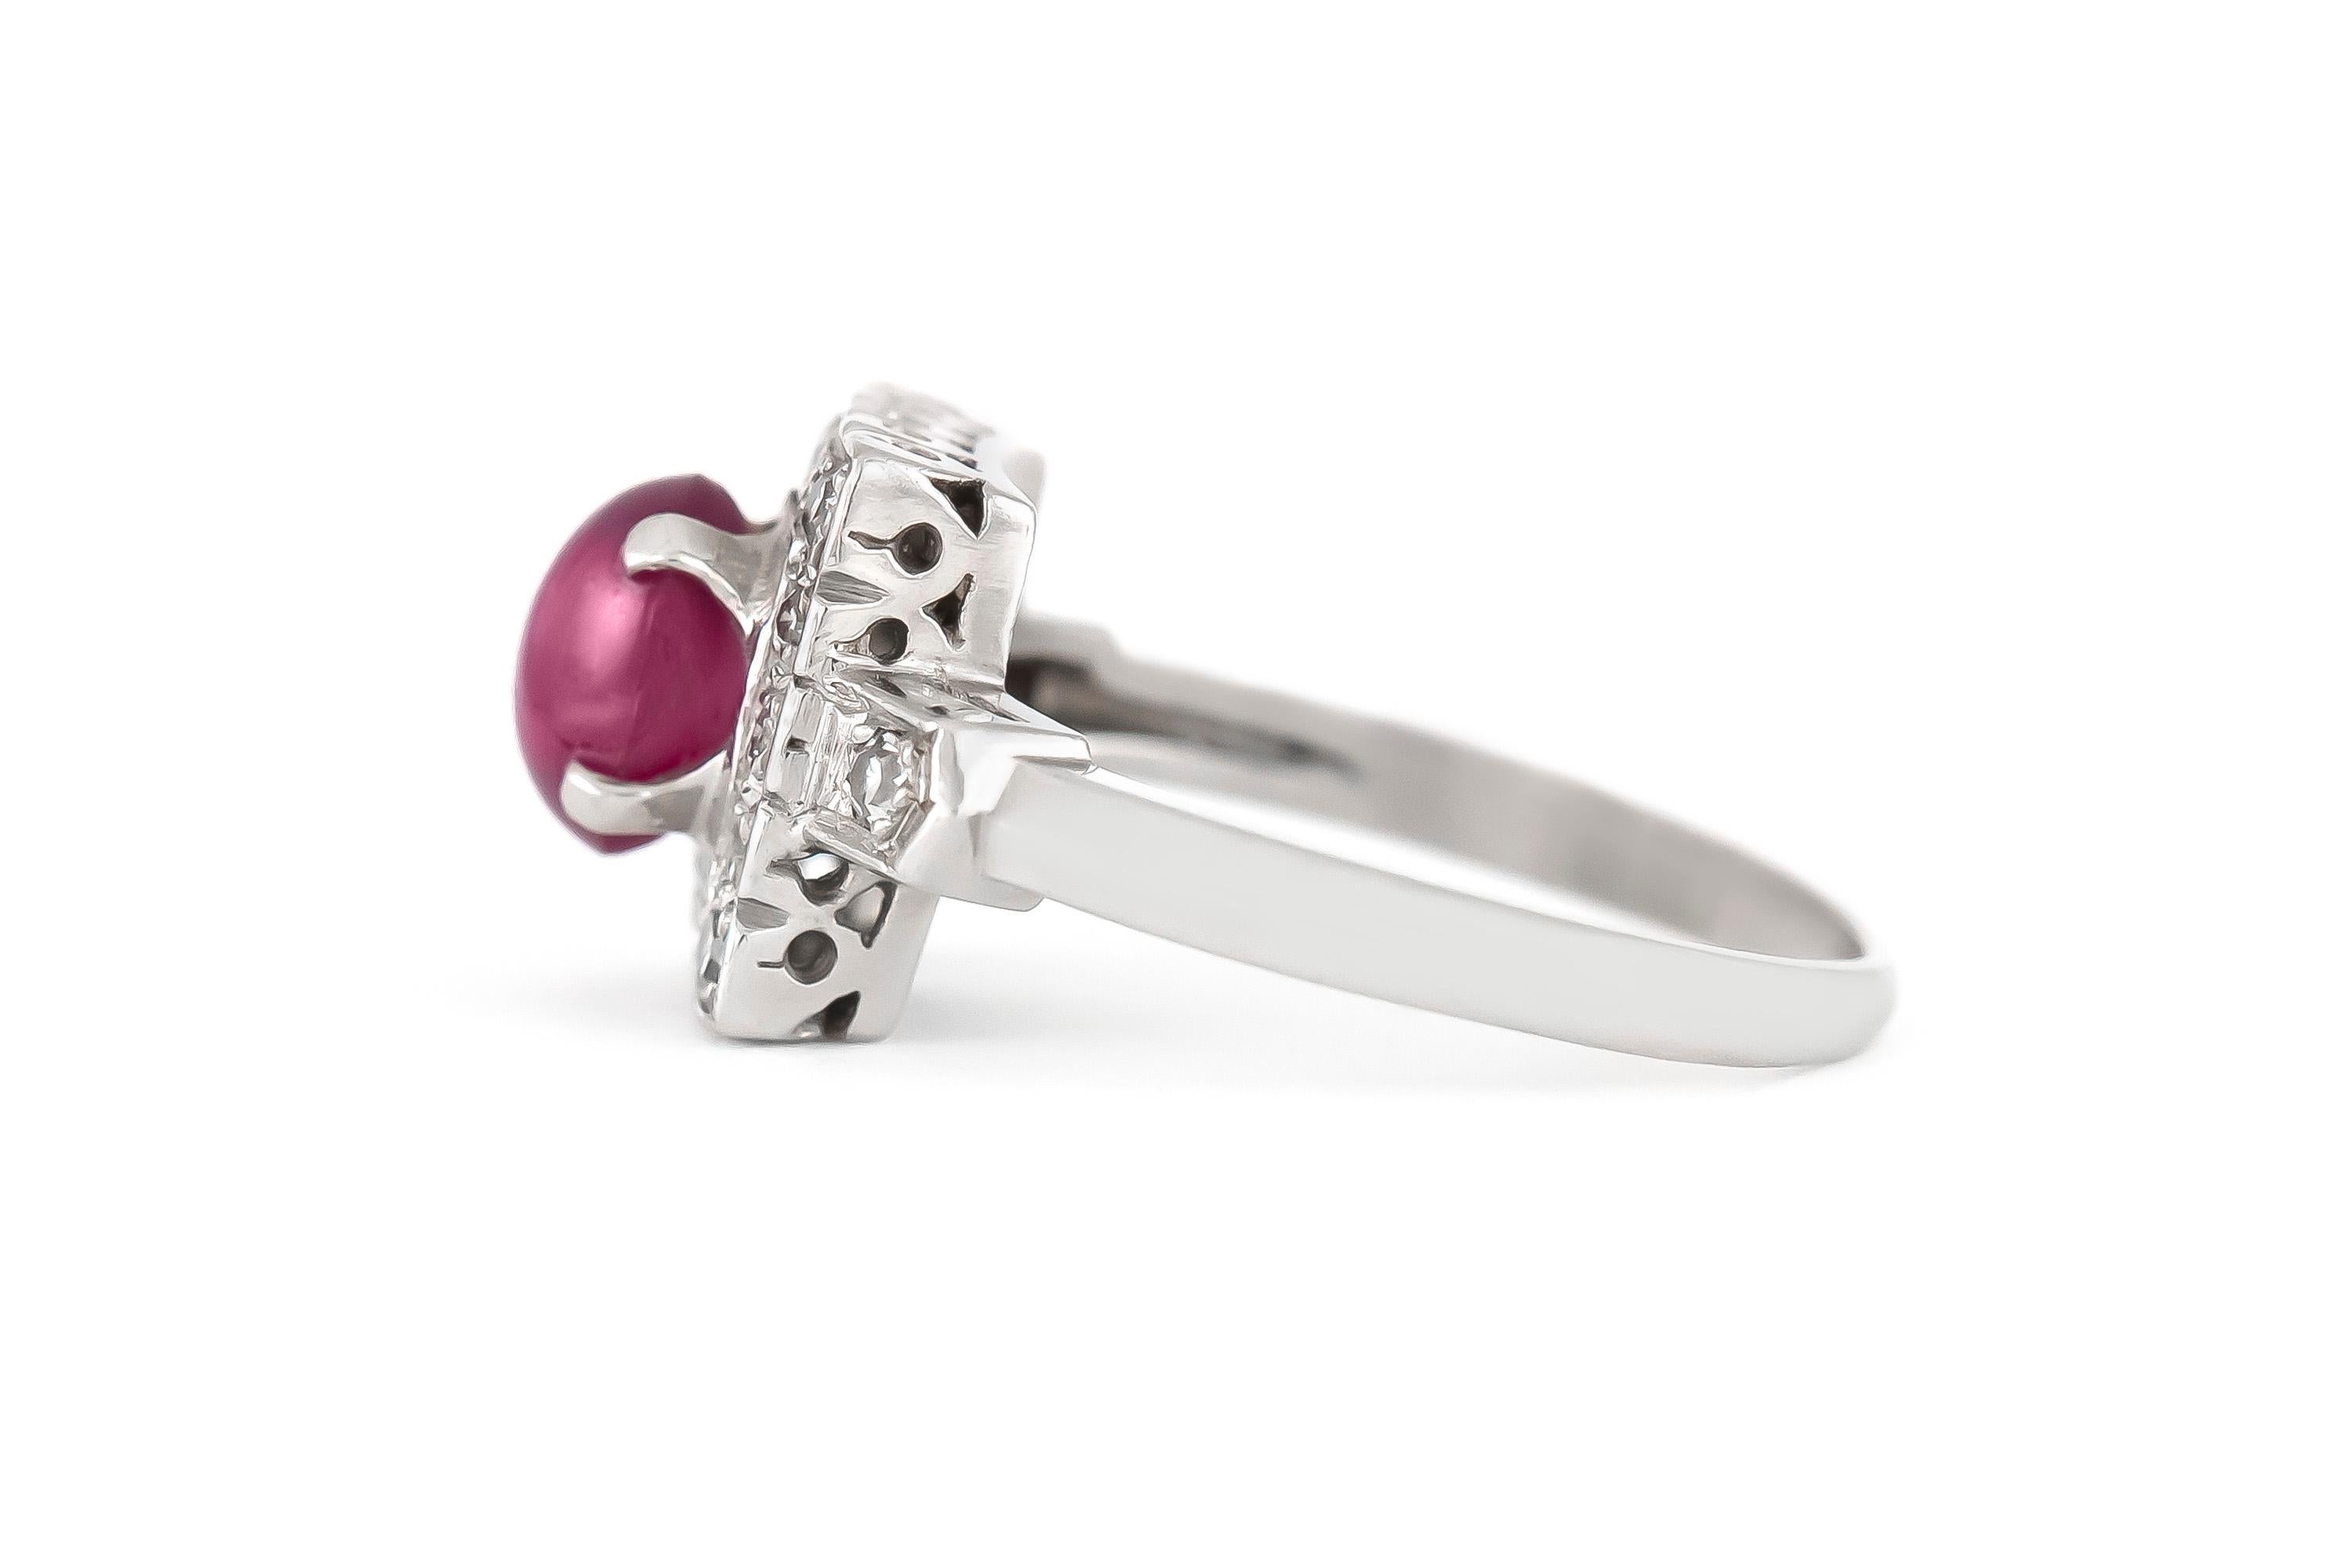 The ring is finely crafted in platinum with center stone ruby weighing approximately  total of 1.50 carat and diamonds weighing approximately total of 0.60 carat.
Circa 1970.